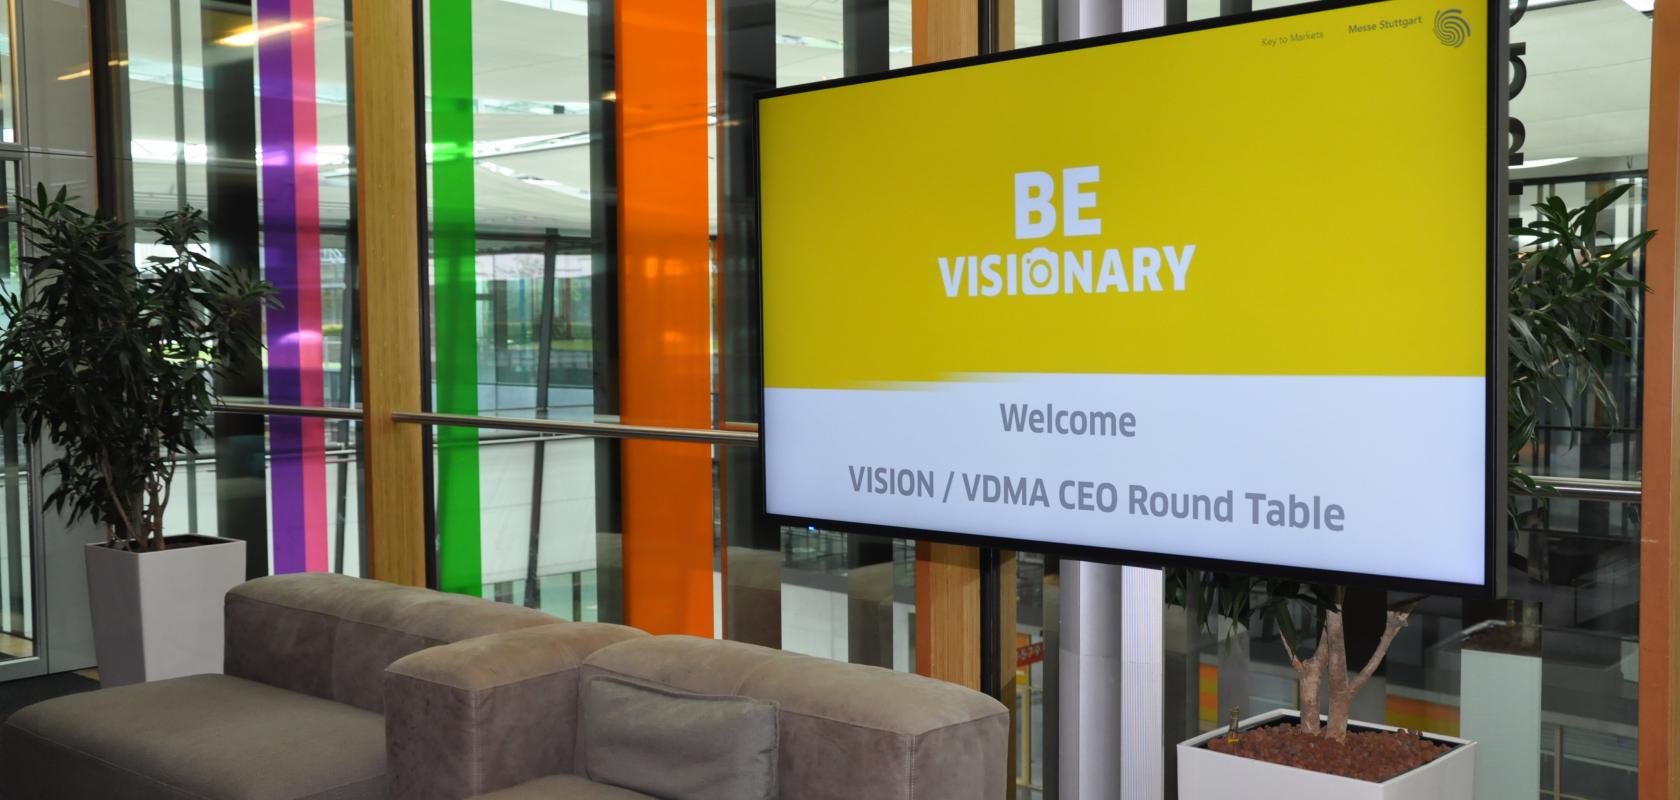 The Vision/VDMA round table event